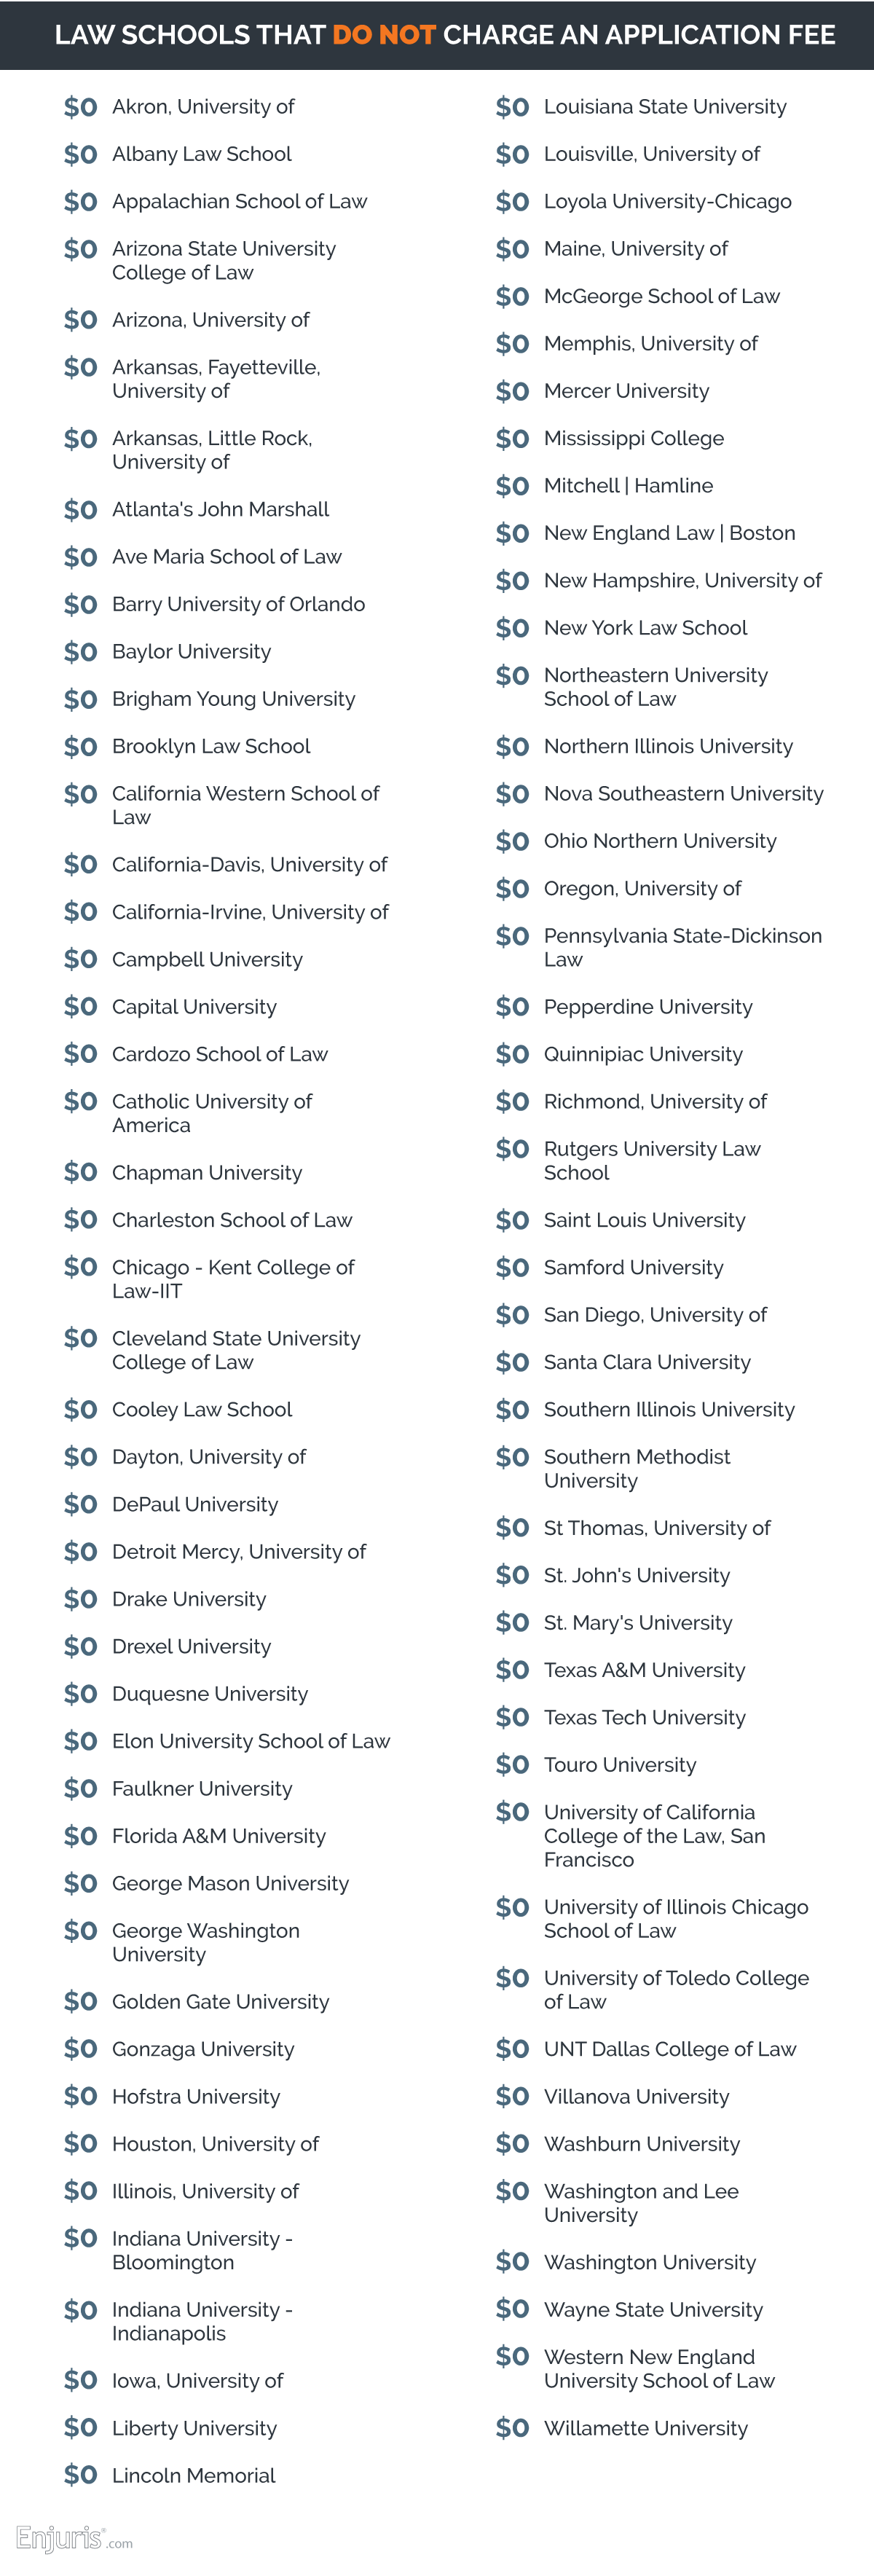 Law schools that do not charge an application fee